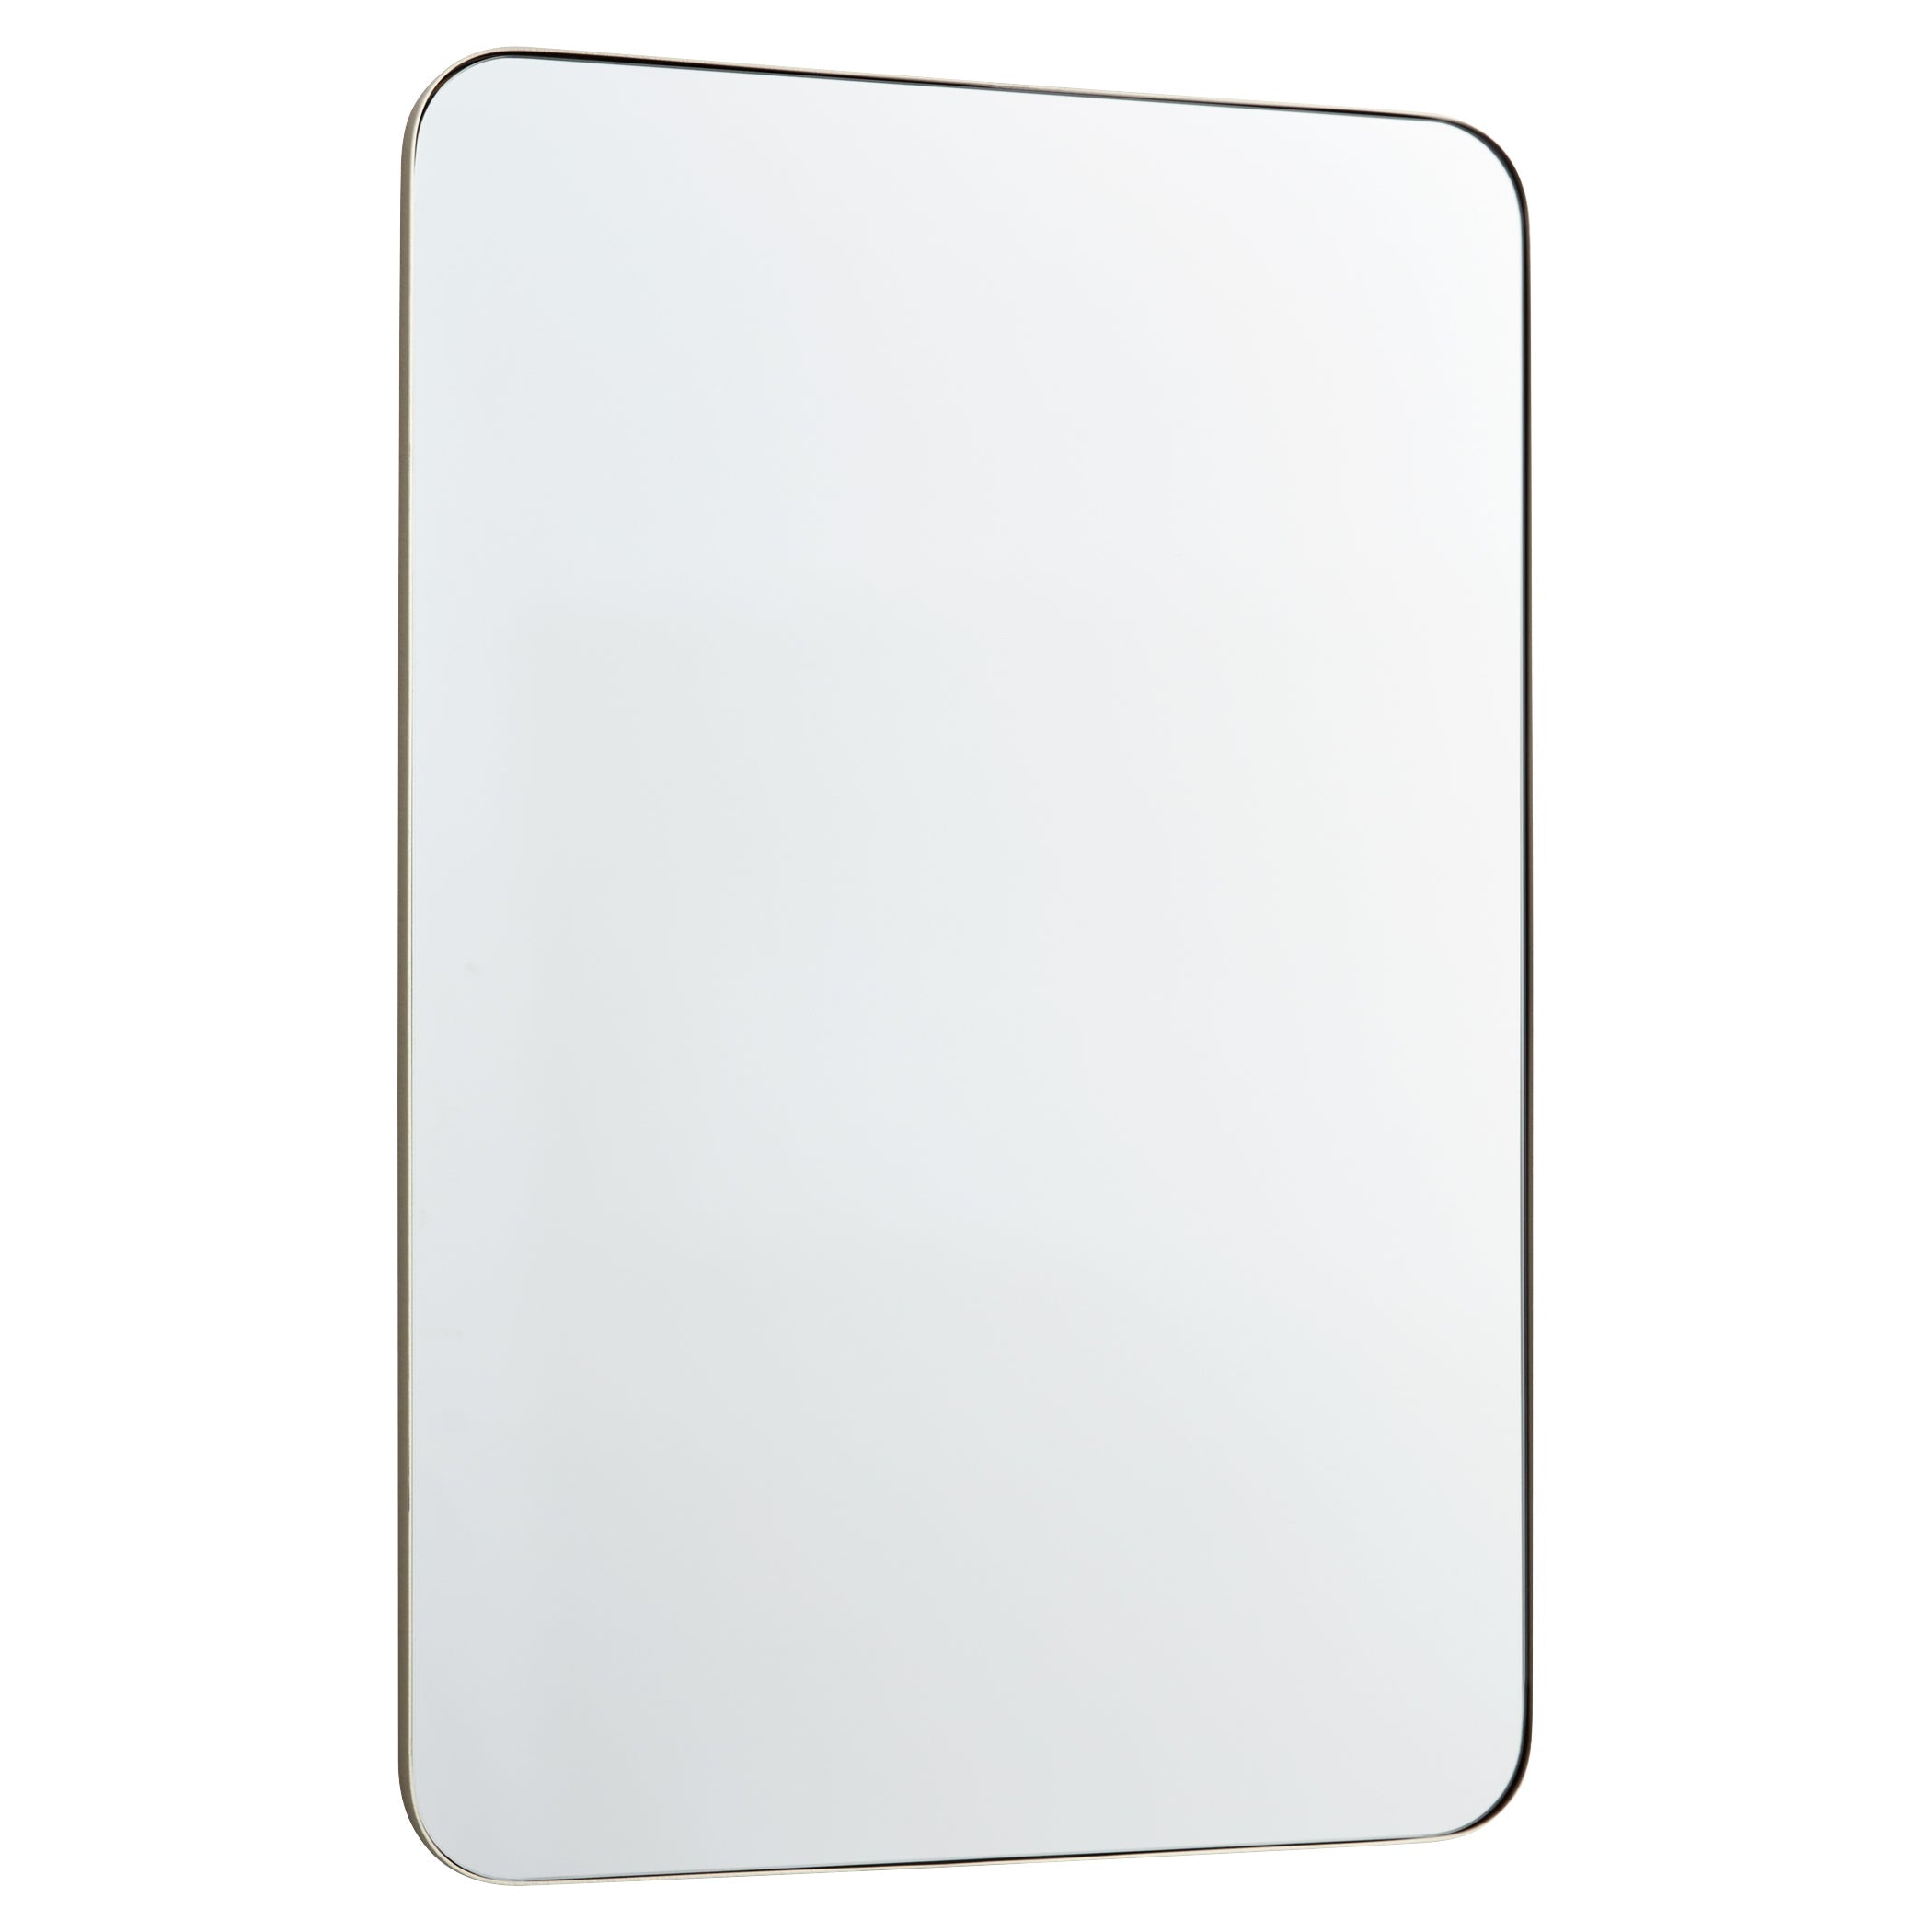 Quorum 12-2436-61 Mirror - Silver Finished